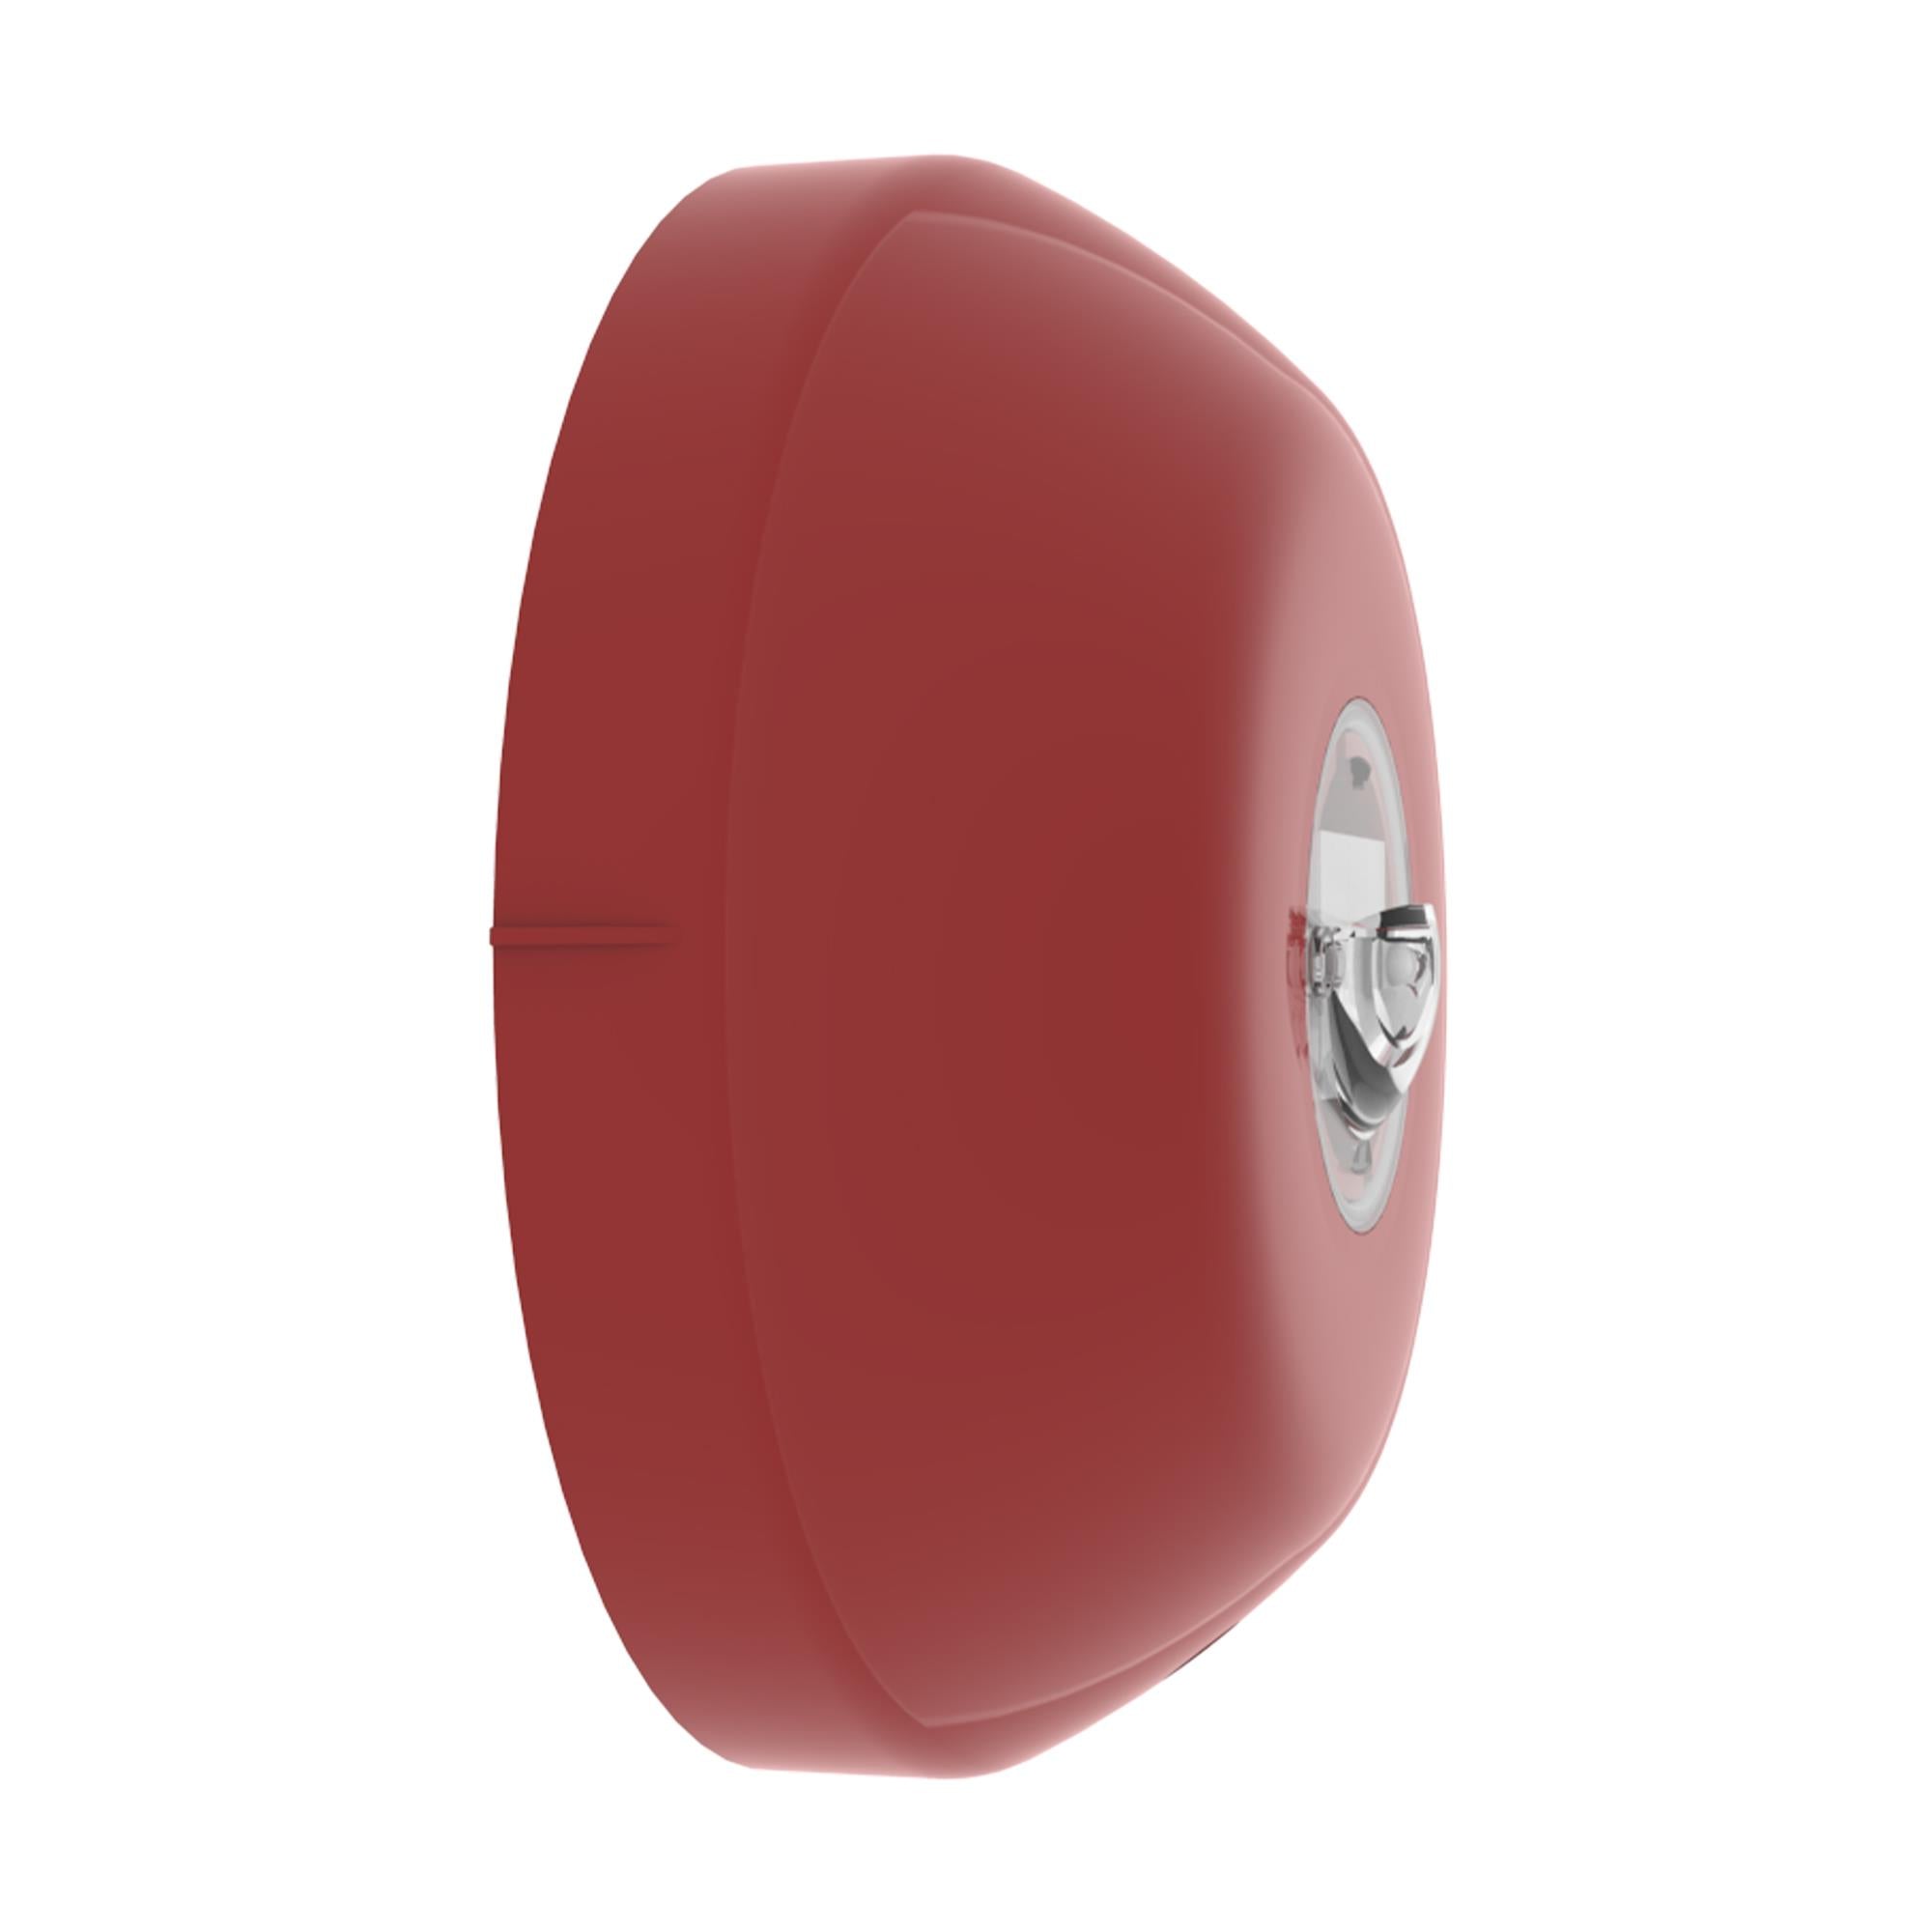 CHQ-WB(RED)WL Wall Beacon, red case, white LEDs - Fire Trade Supplies